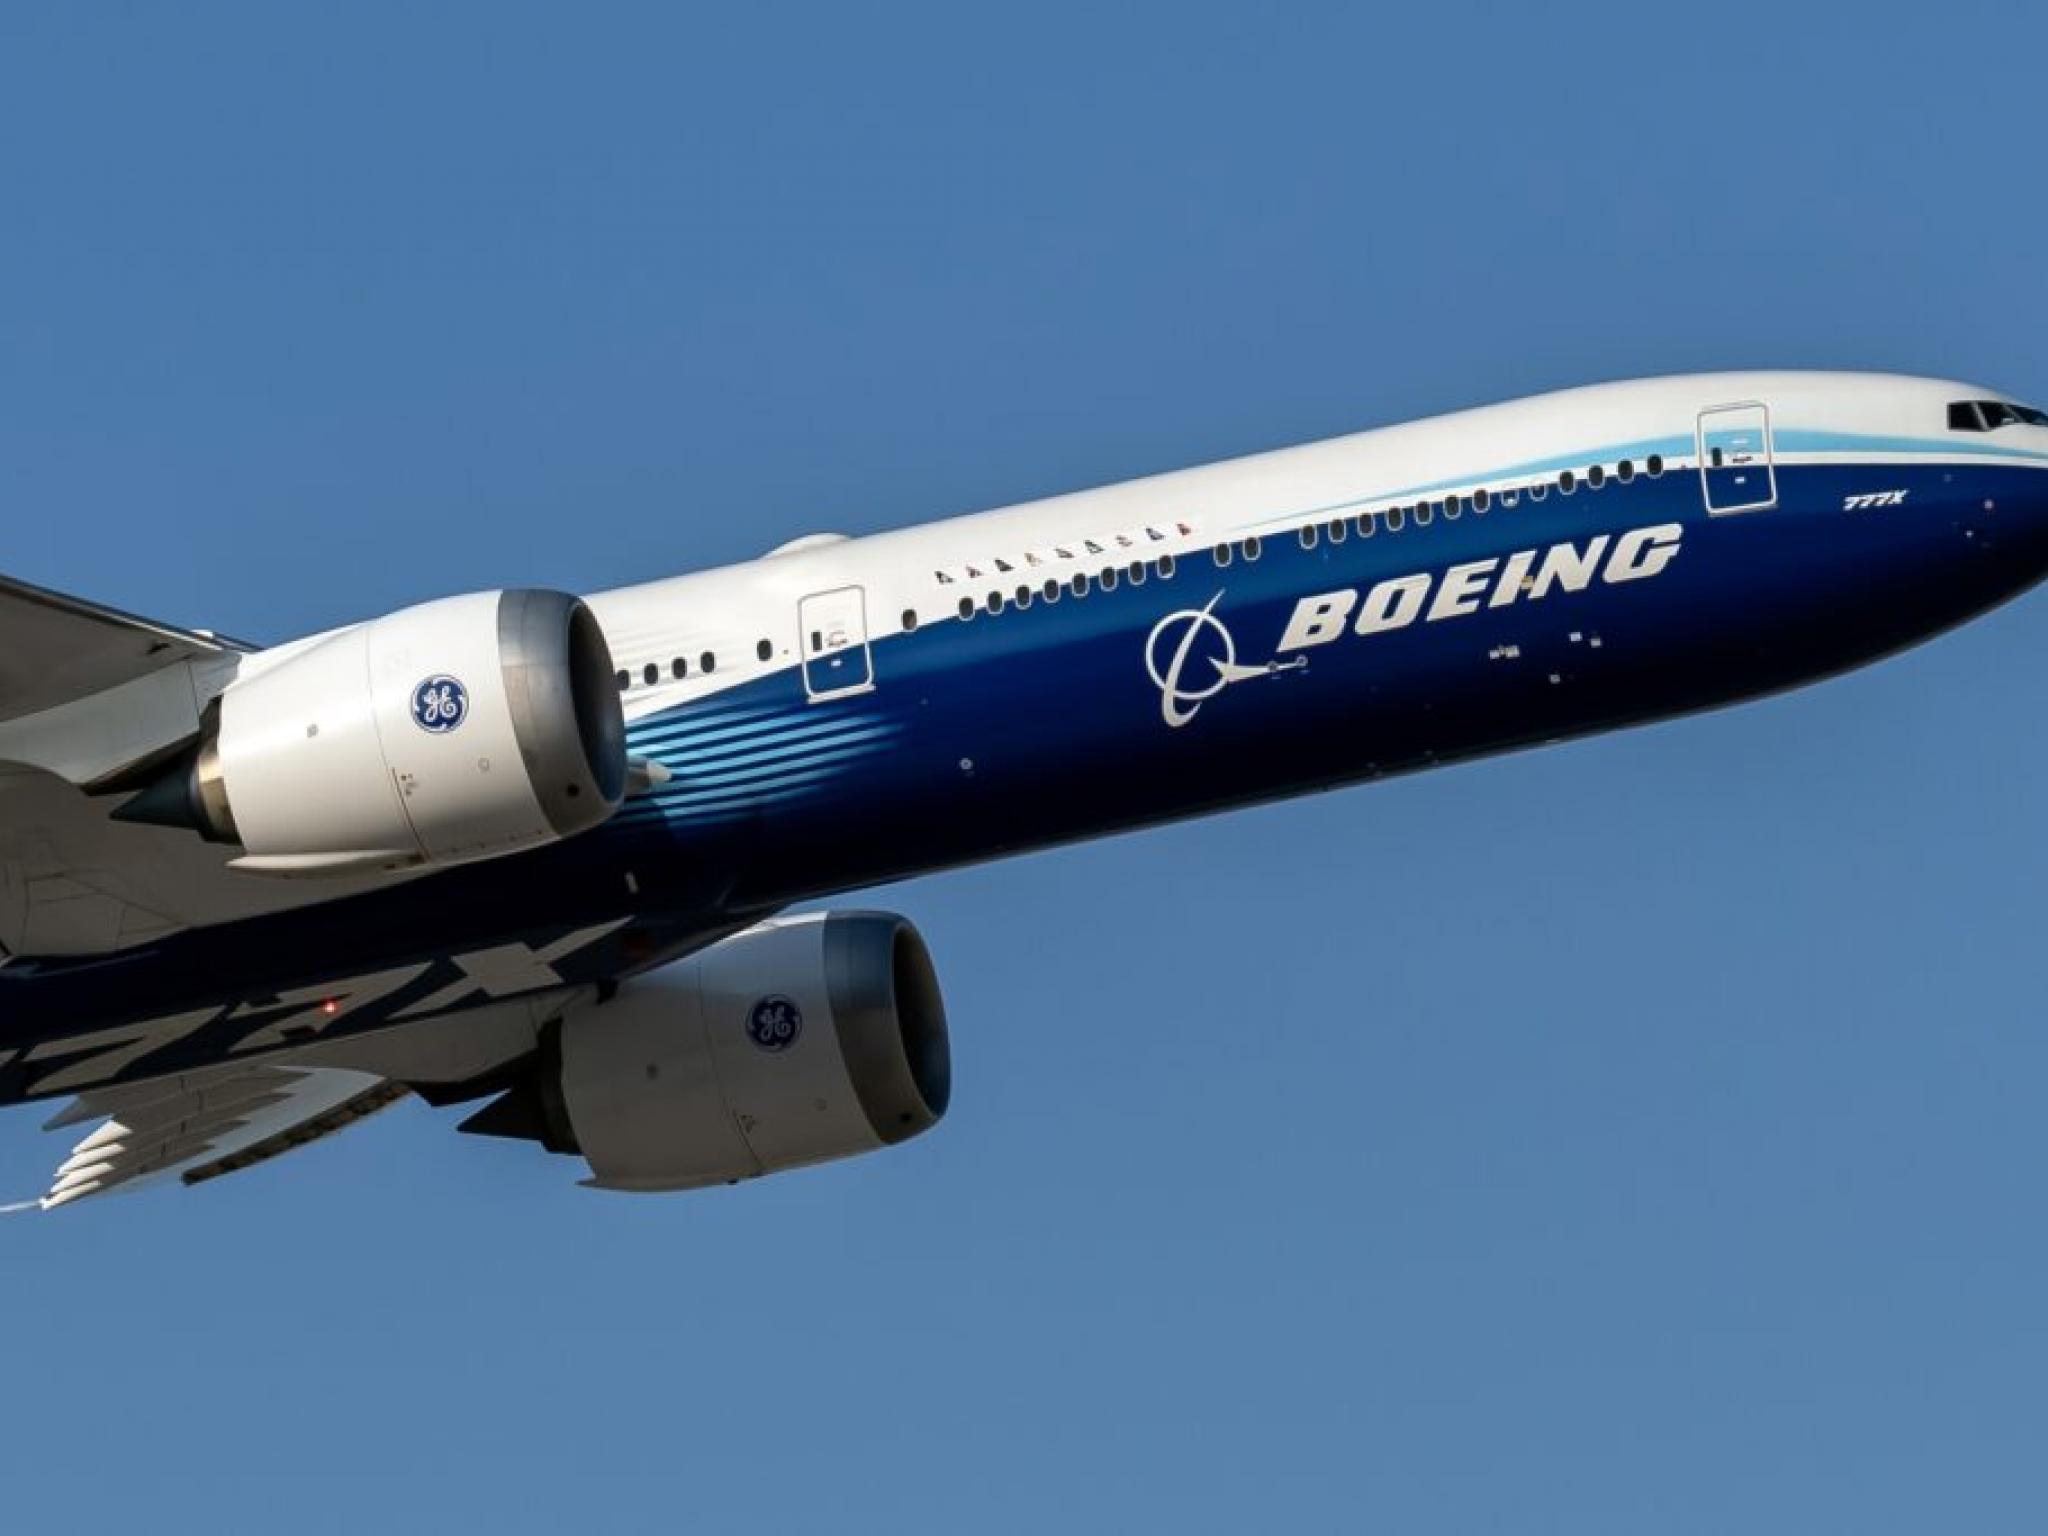  new-boeing-whistleblowers-speak-out-death-of-colleagues-doesnt-add-up 